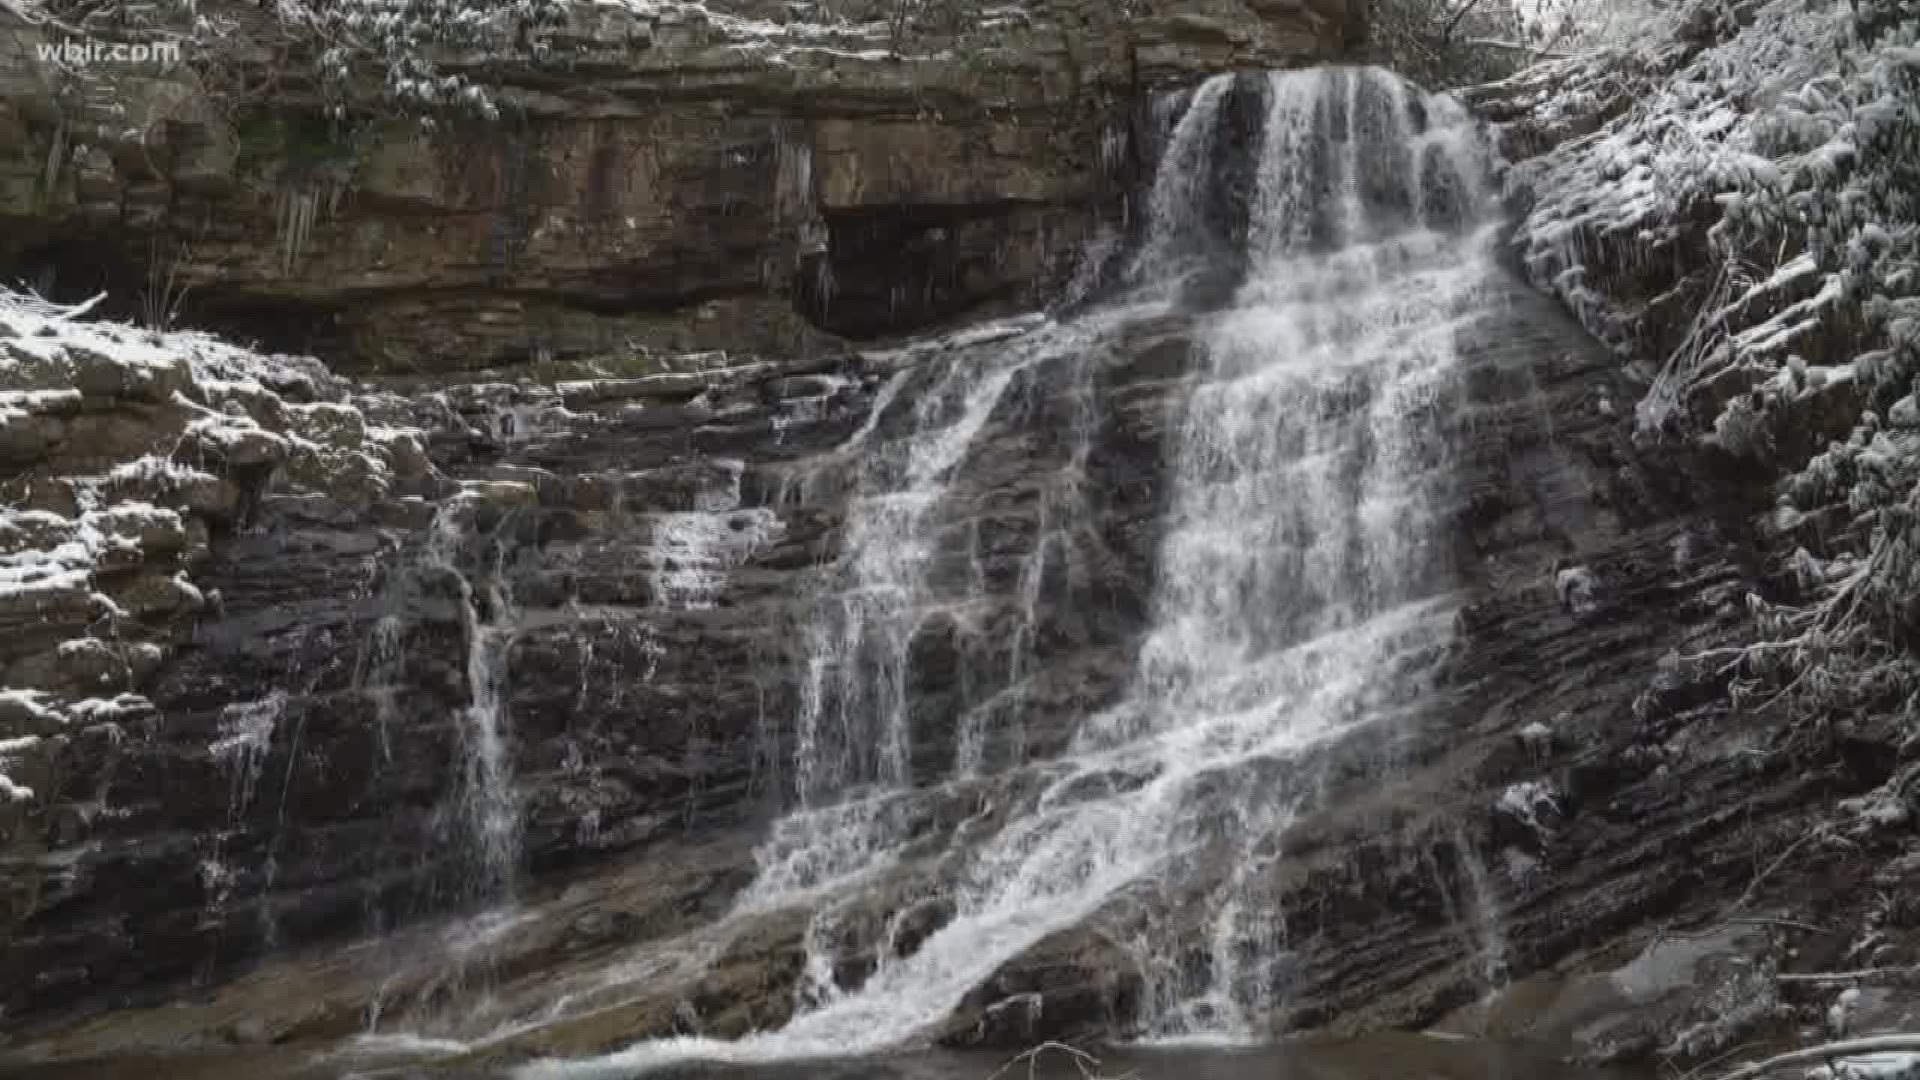 Fitness expert Missy Kane shares her latest Fit and Fun adventure to Margarette Falls.